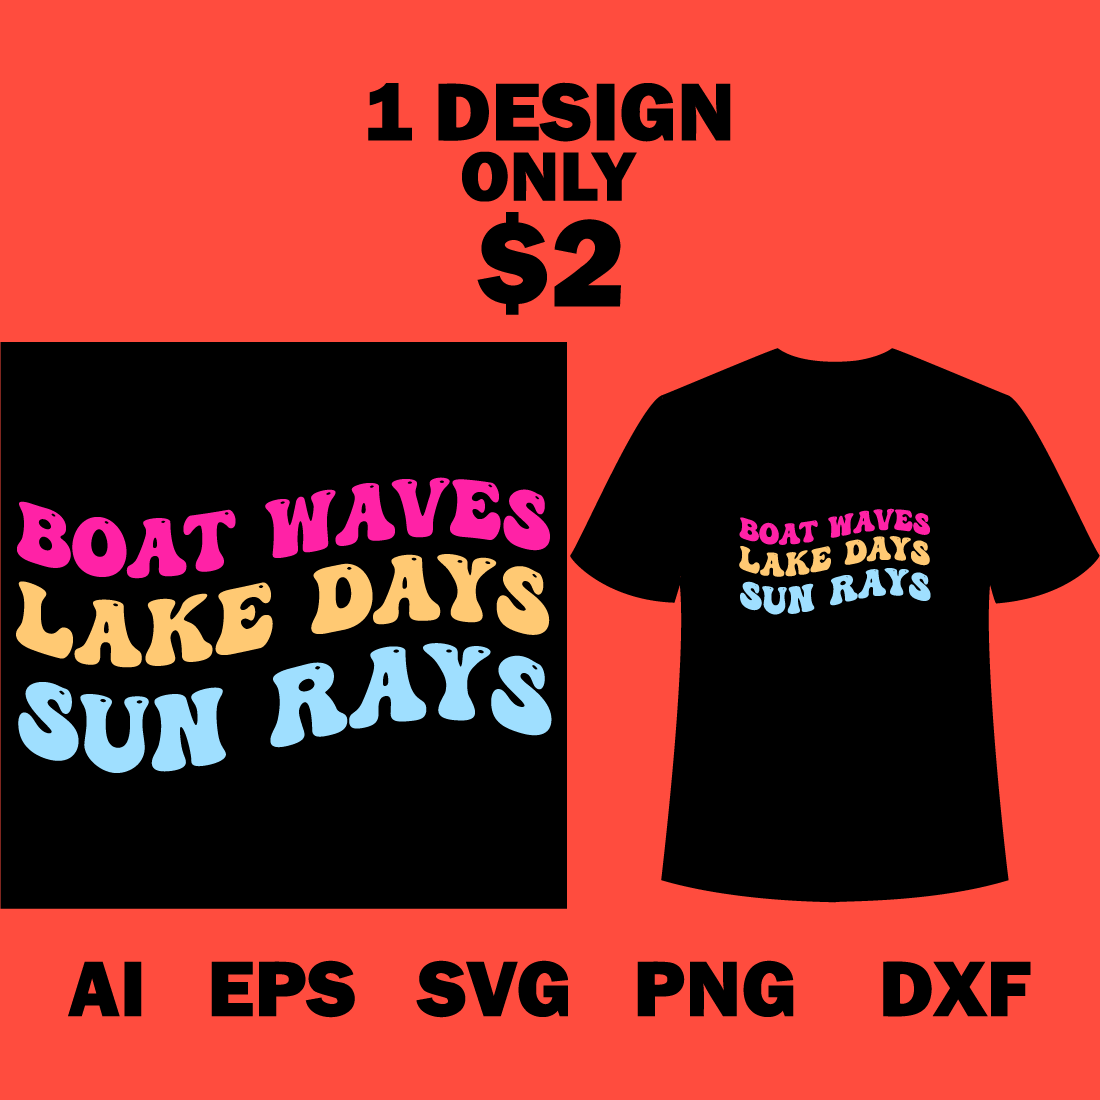 Image of a T-shirt with a great slogan Boat Waves Lake Days Sun Rays